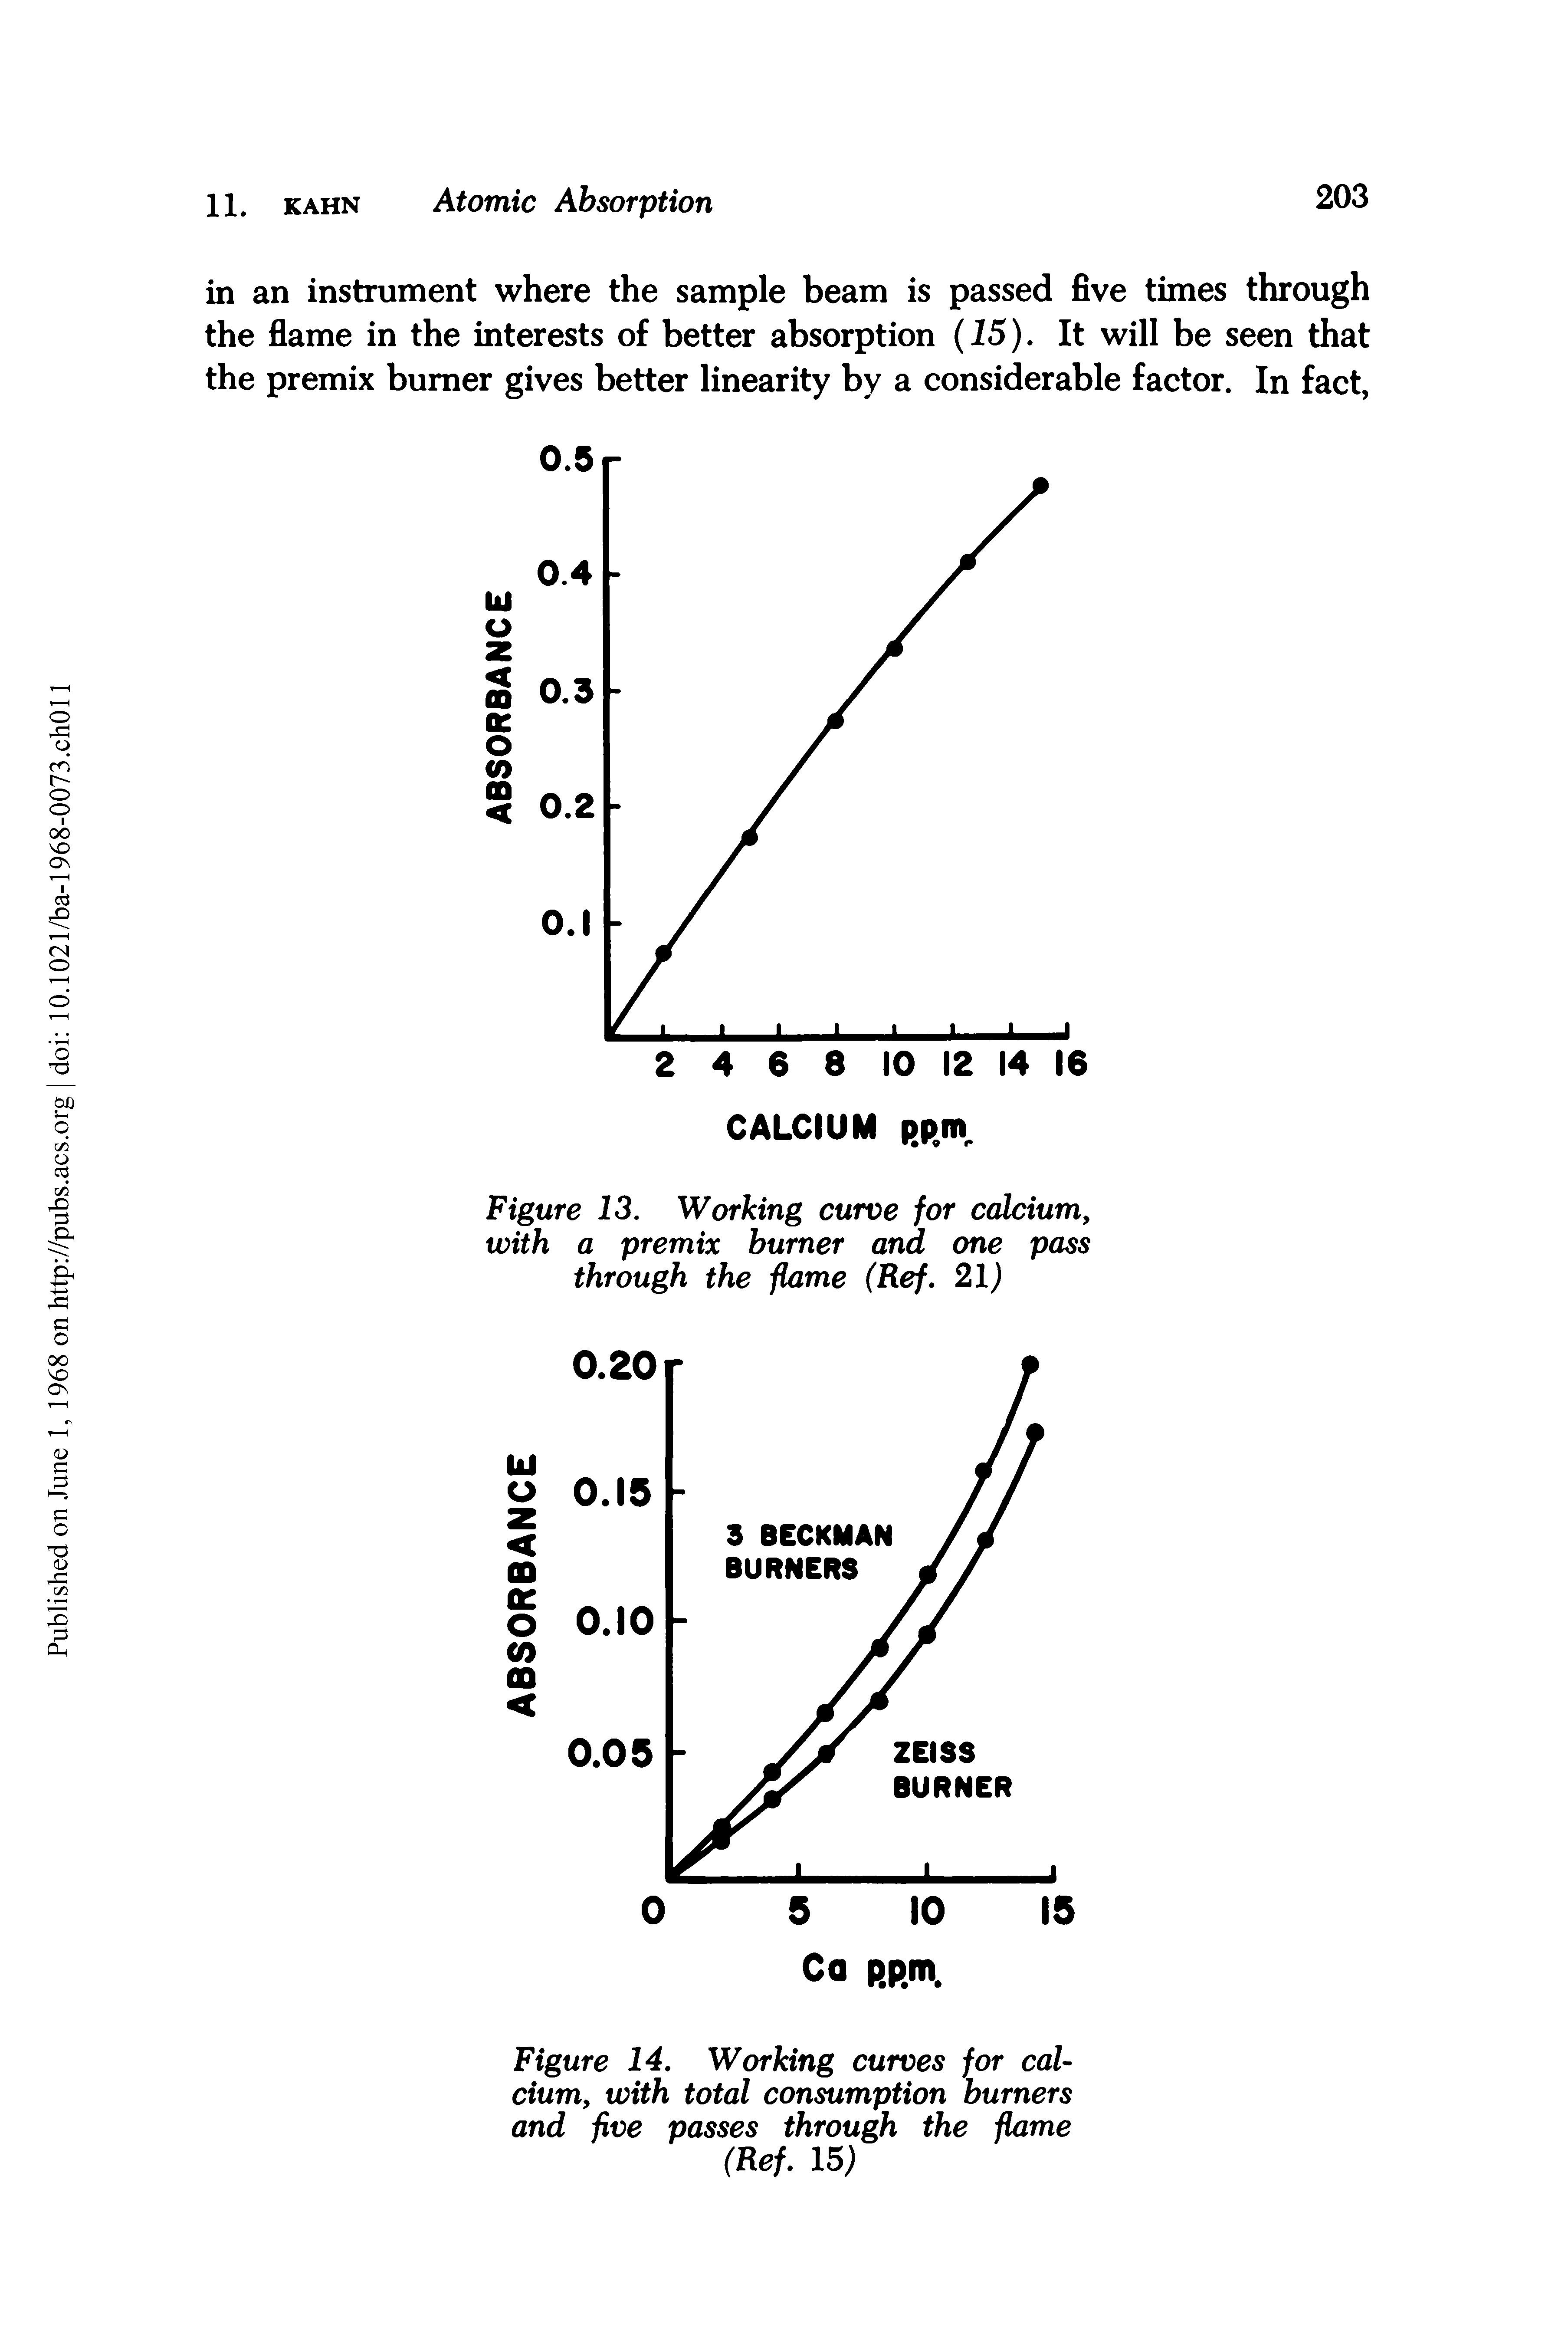 Figure 14. Working curves for calcium, with total consumption burners and five passes through the flame (Ref. 15)...